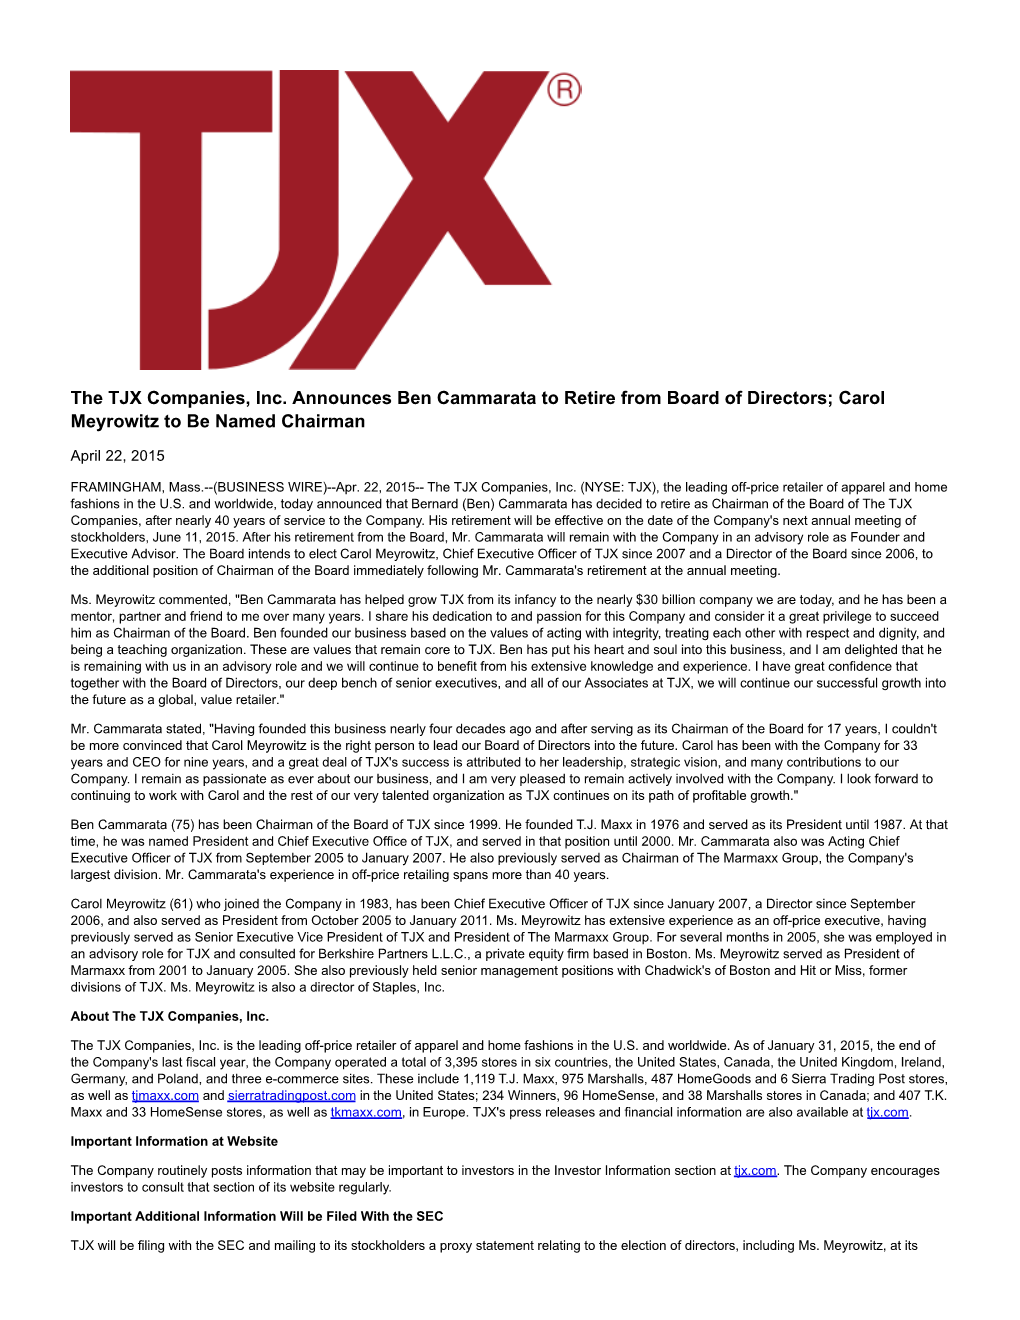 The TJX Companies, Inc. Announces Ben Cammarata to Retire from Board of Directors; Carol Meyrowitz to Be Named Chairman